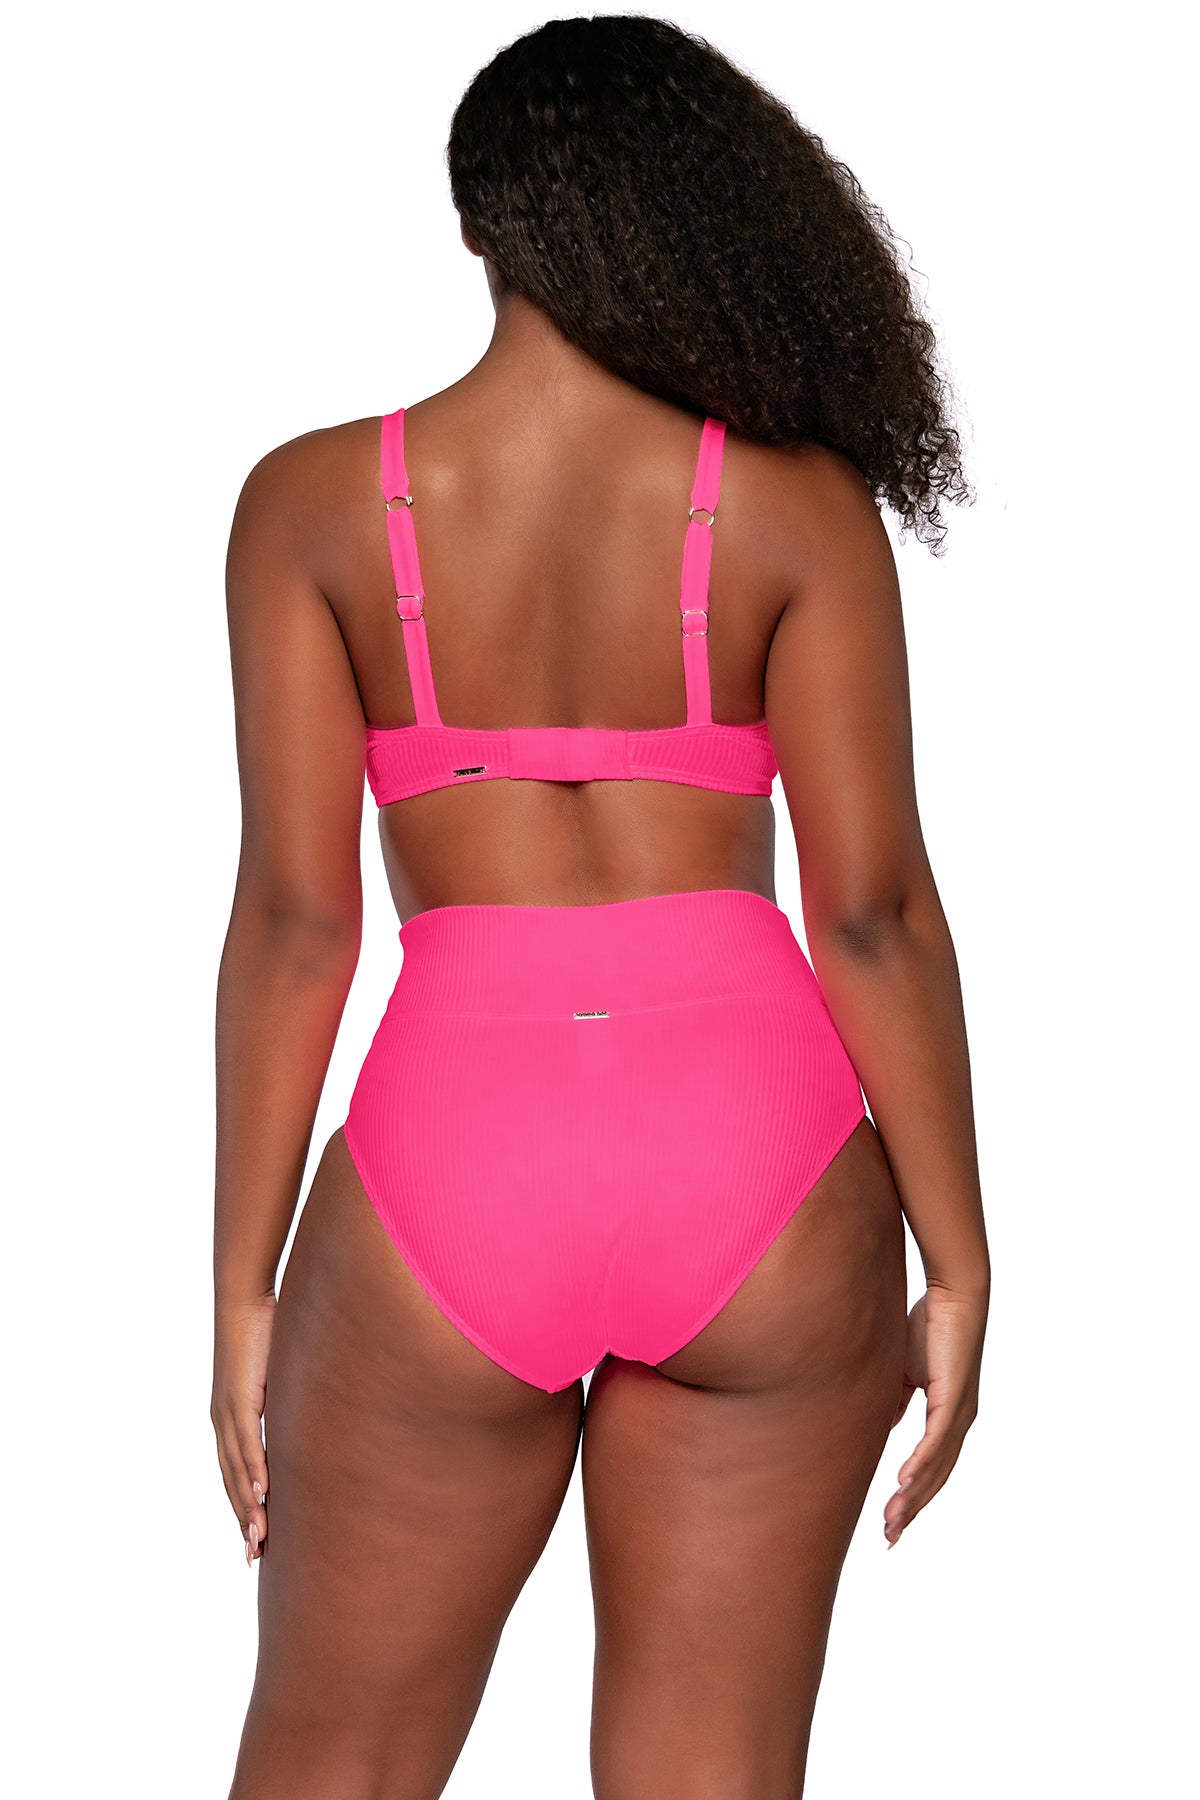 Back view of Sunsets Neon Pink Kauai Keyhole Top